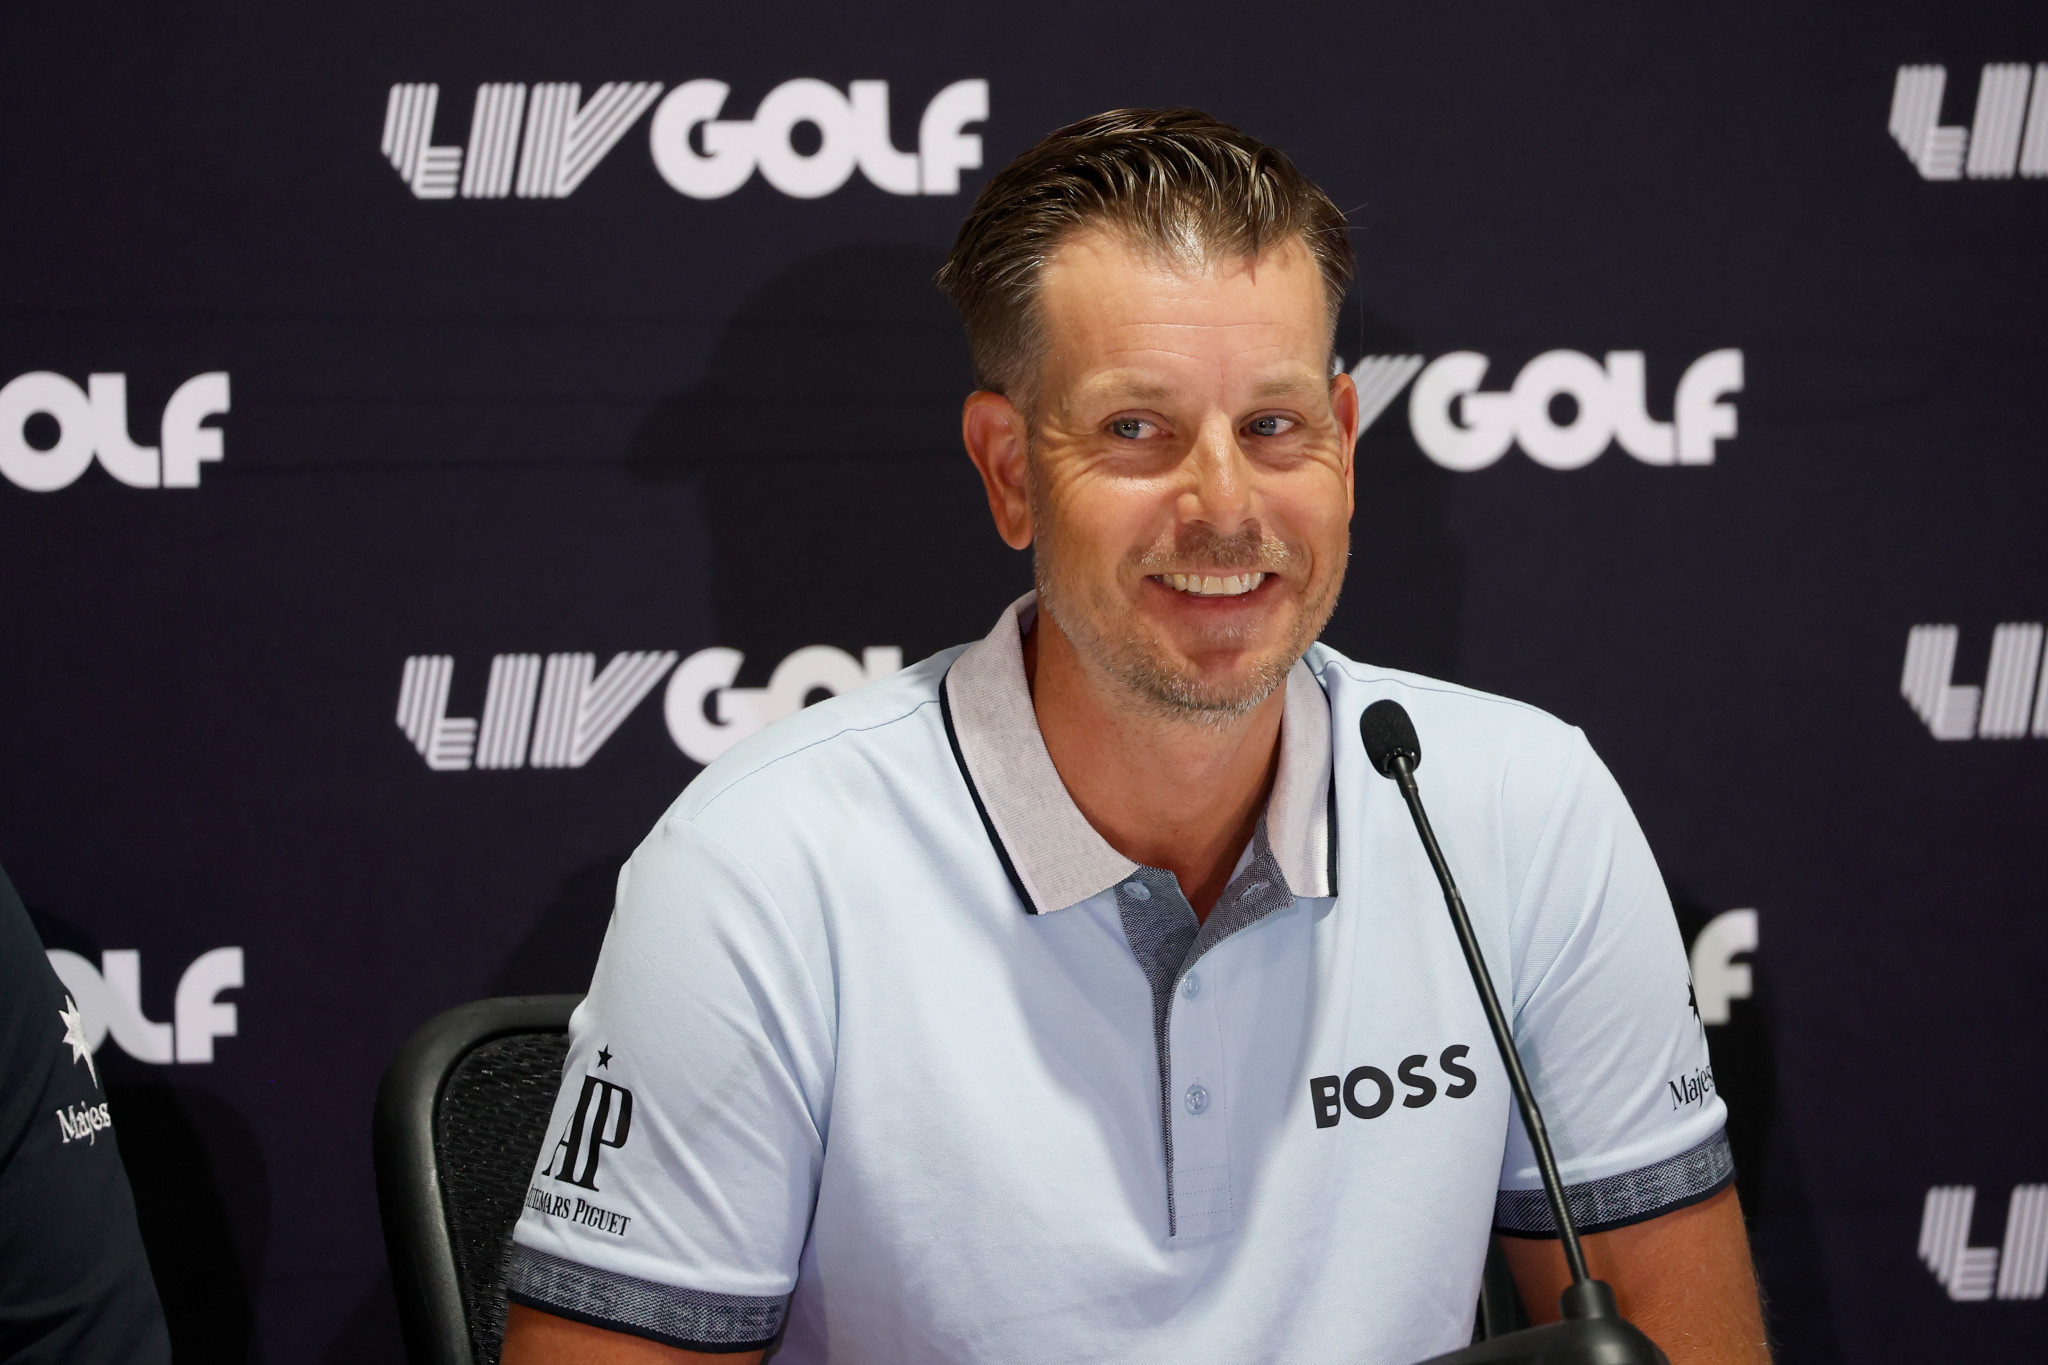 Former Open champion Henrik Stenson has had his ties with the Swedish Golf Federation cut due to joining LIV Golf ©Getty Images